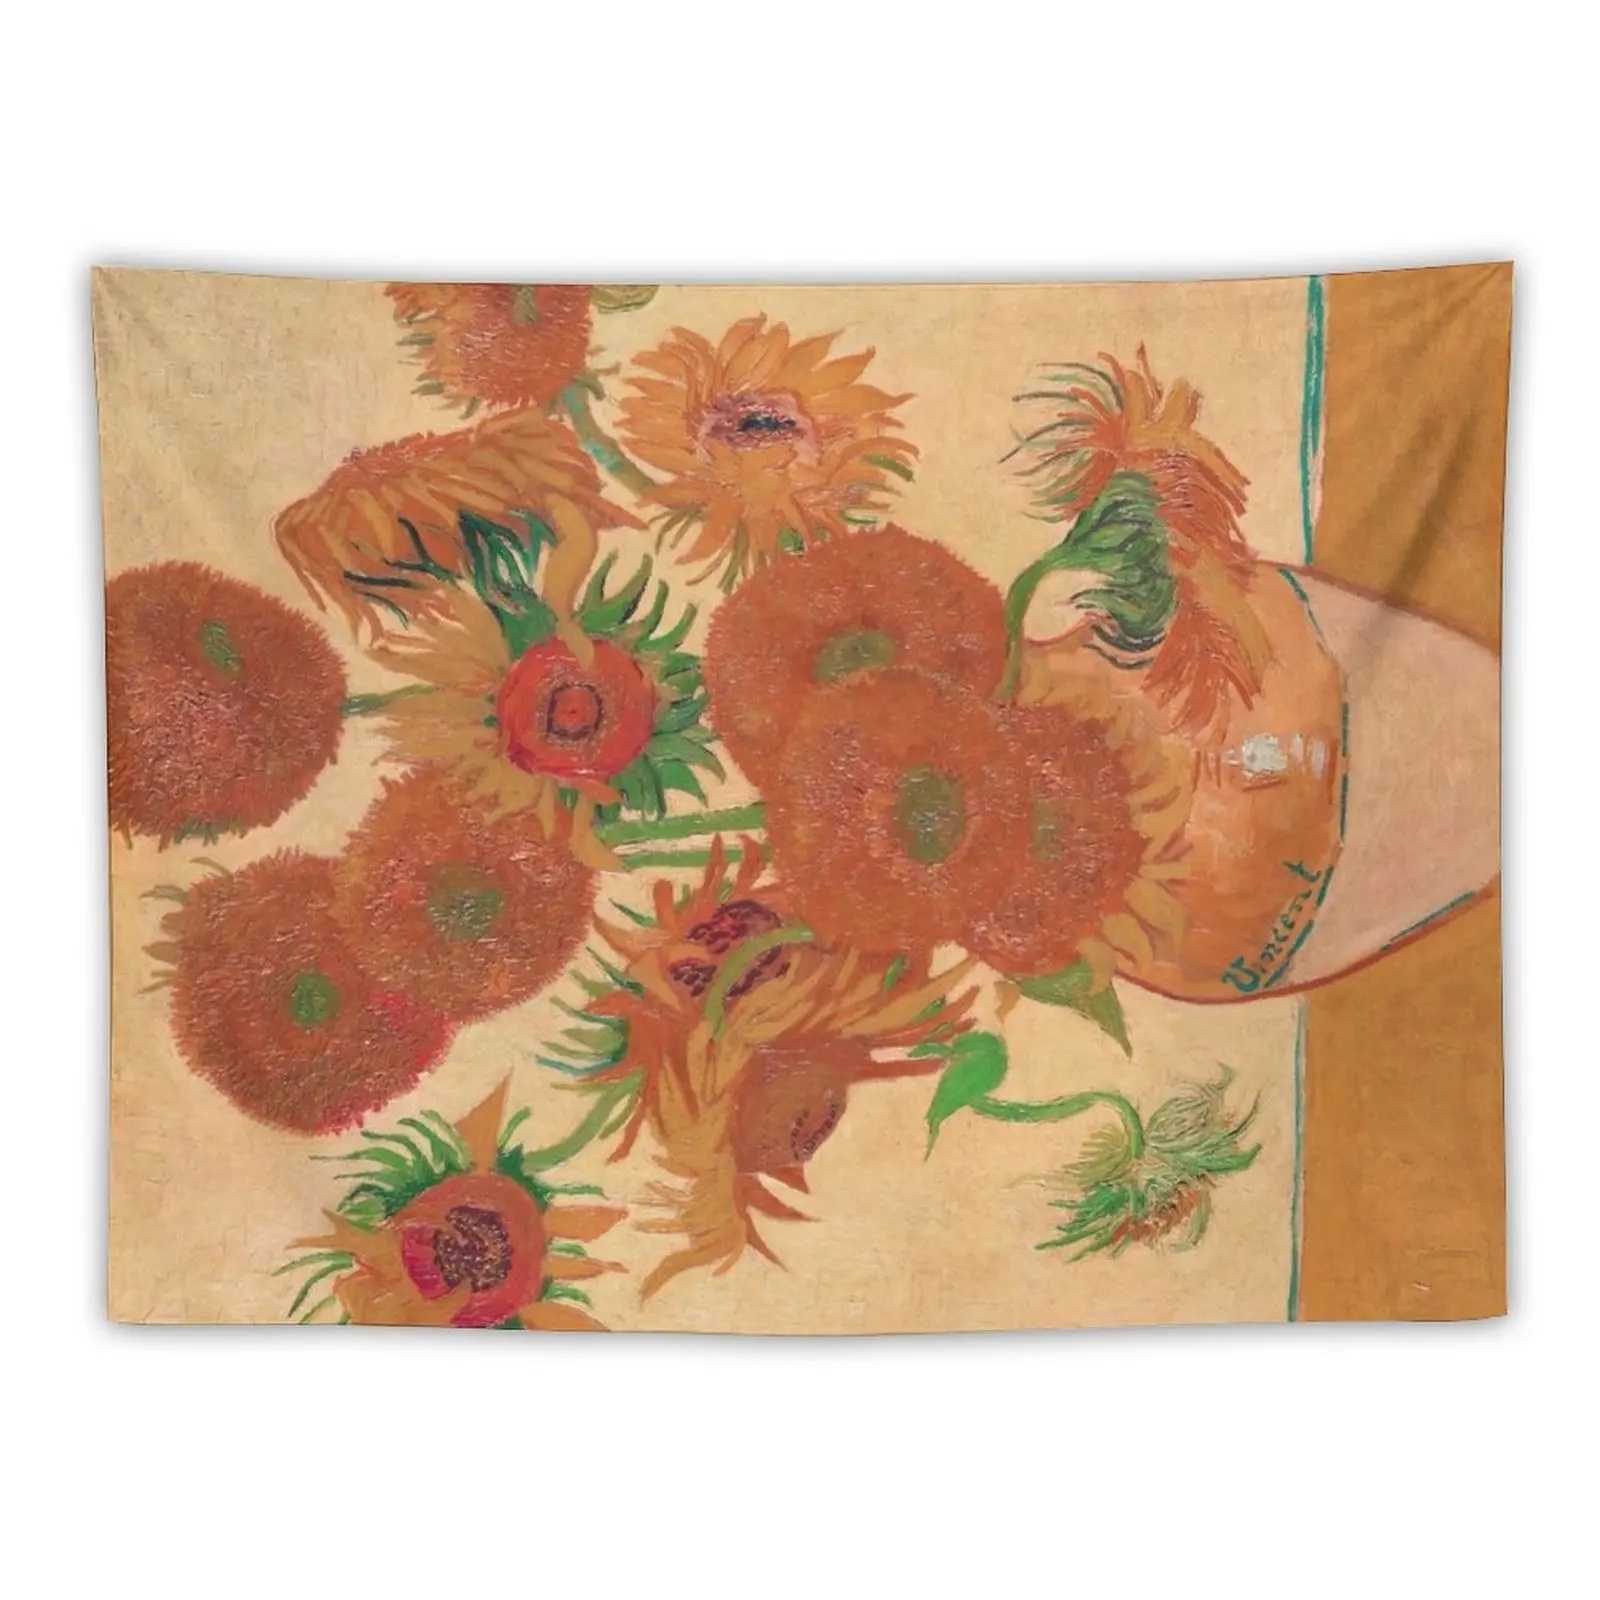 

Vase with Fourteen Sunflowers by Vincent van Gogh Tapestry Wall Coverings Bedroom Decor Room Ornaments